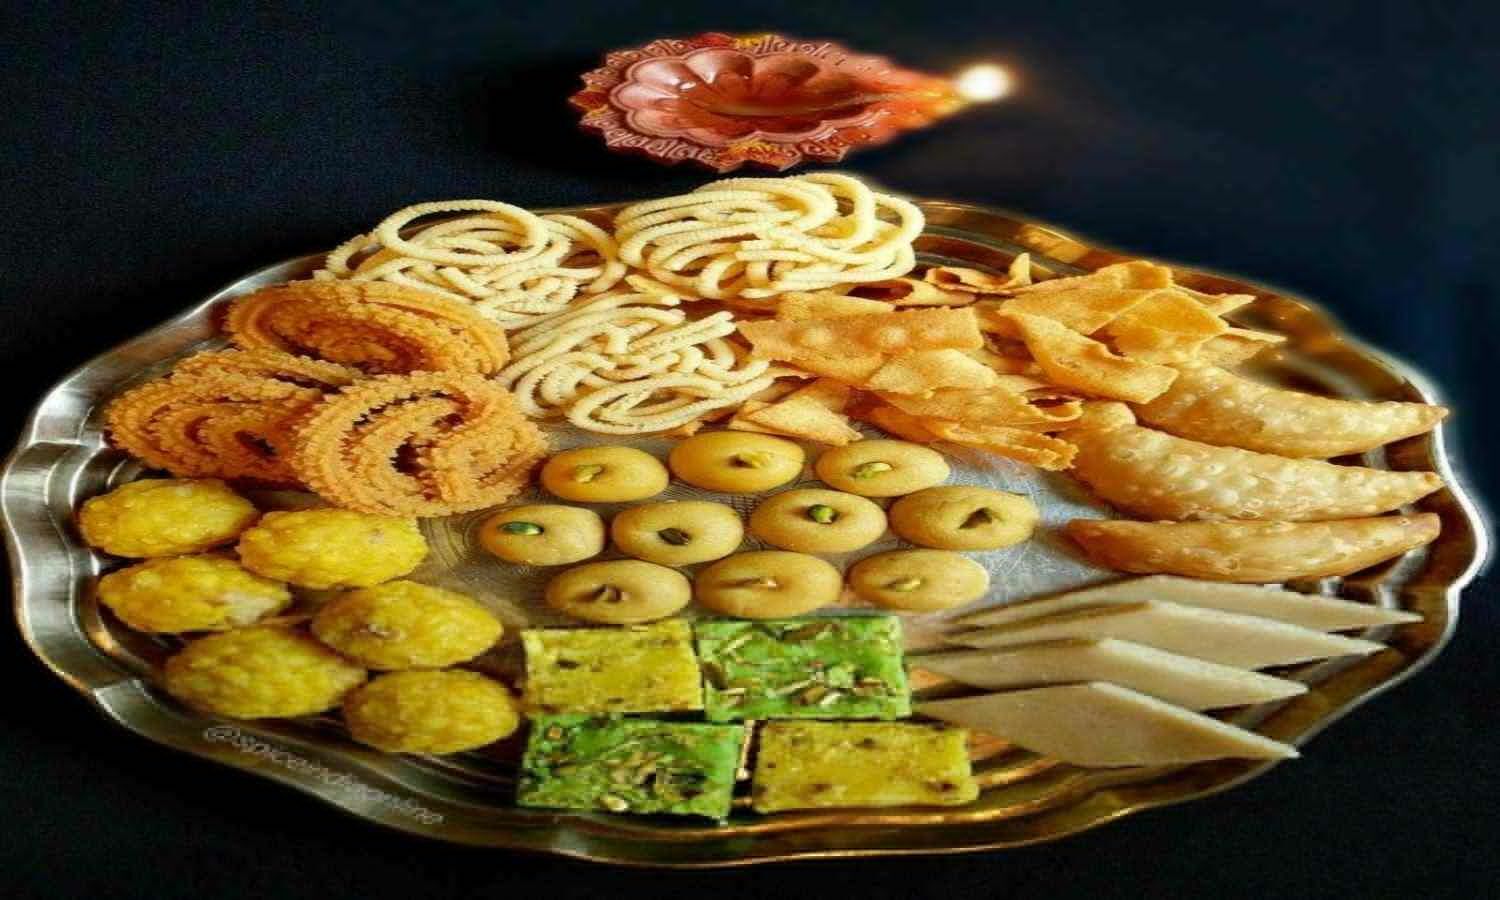 2022 Festival Special: Stay alert this festival, identify whether the sweets that have come home are real or fake